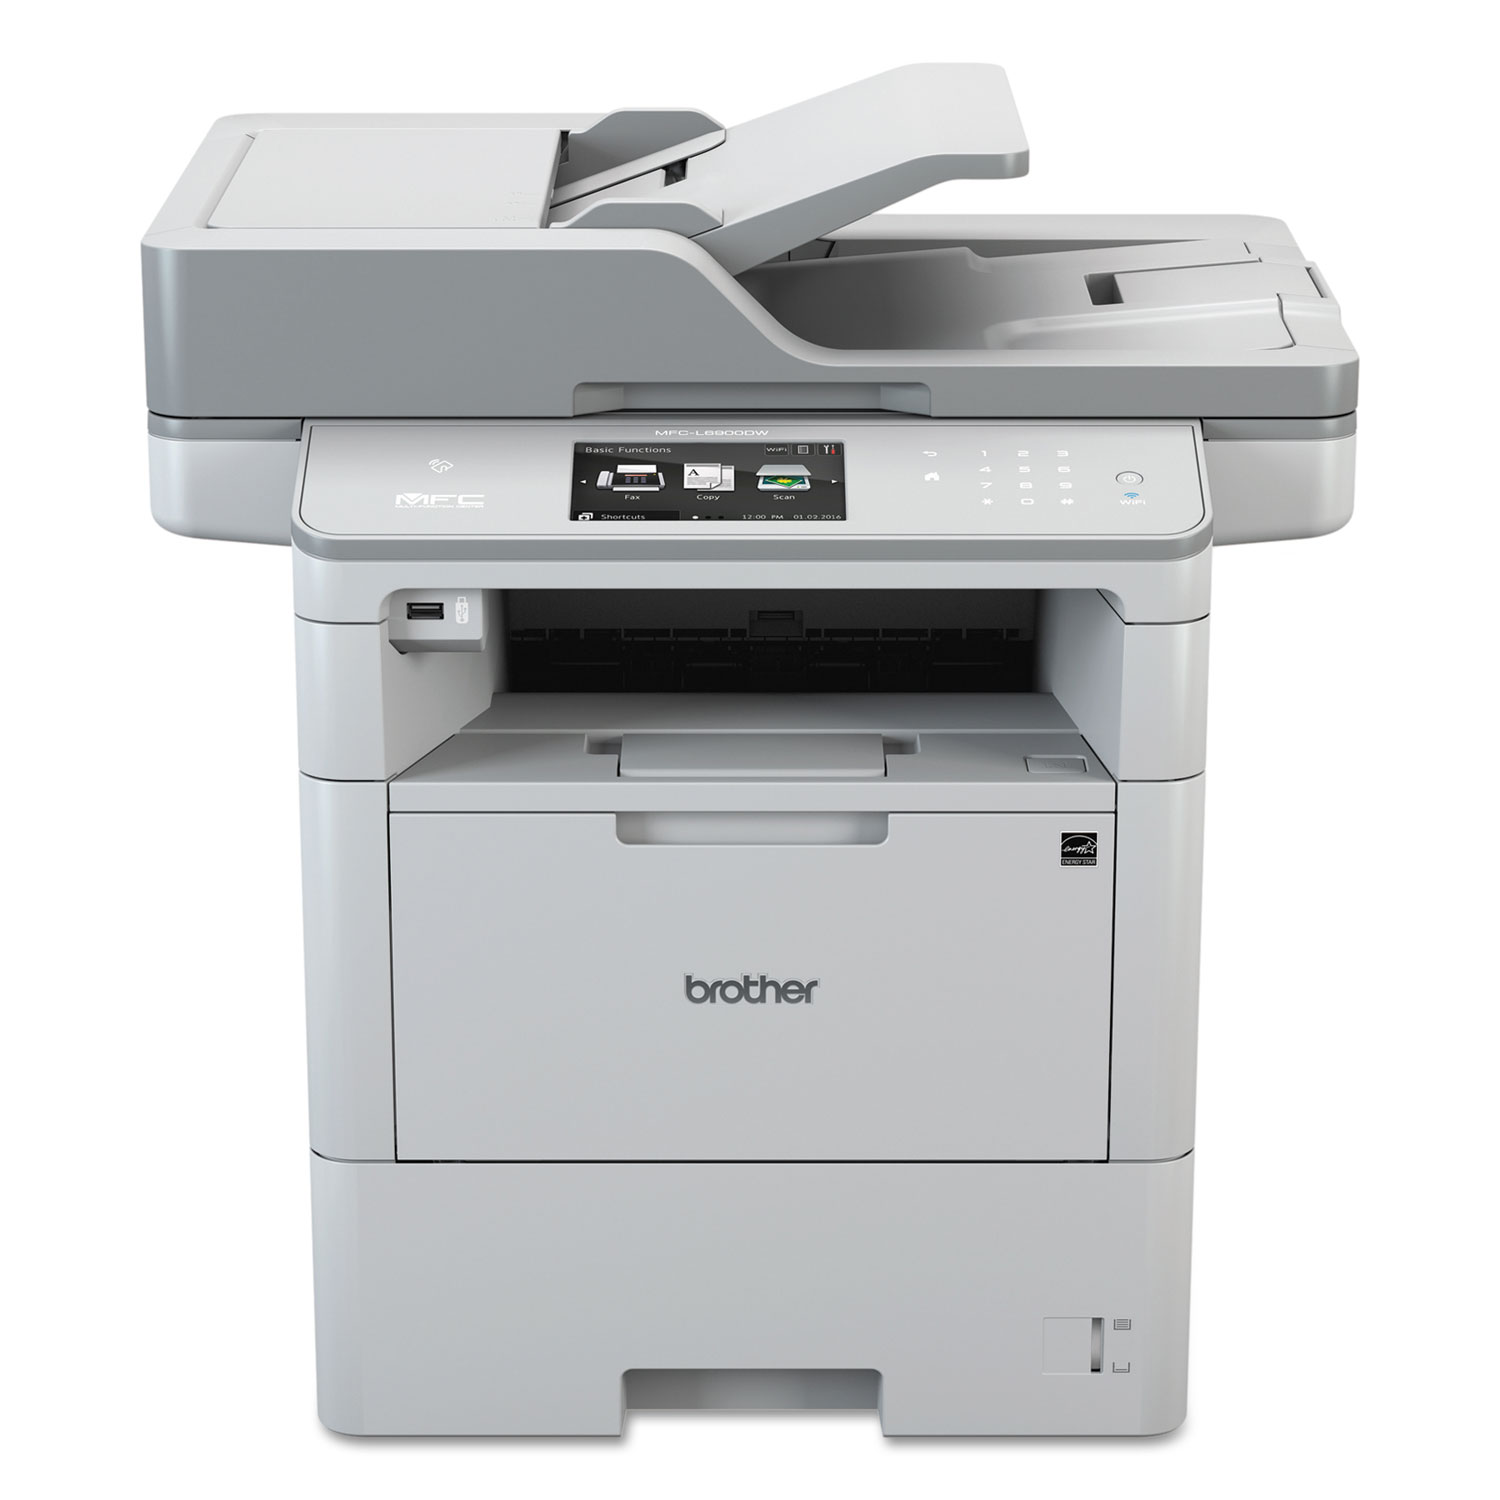  Brother MFCL6900DW MFCL6900DW Business Laser All-in-One Printer for Mid-Size Workgroups with Higher Print Volumes (BRTMFCL6900DW) 